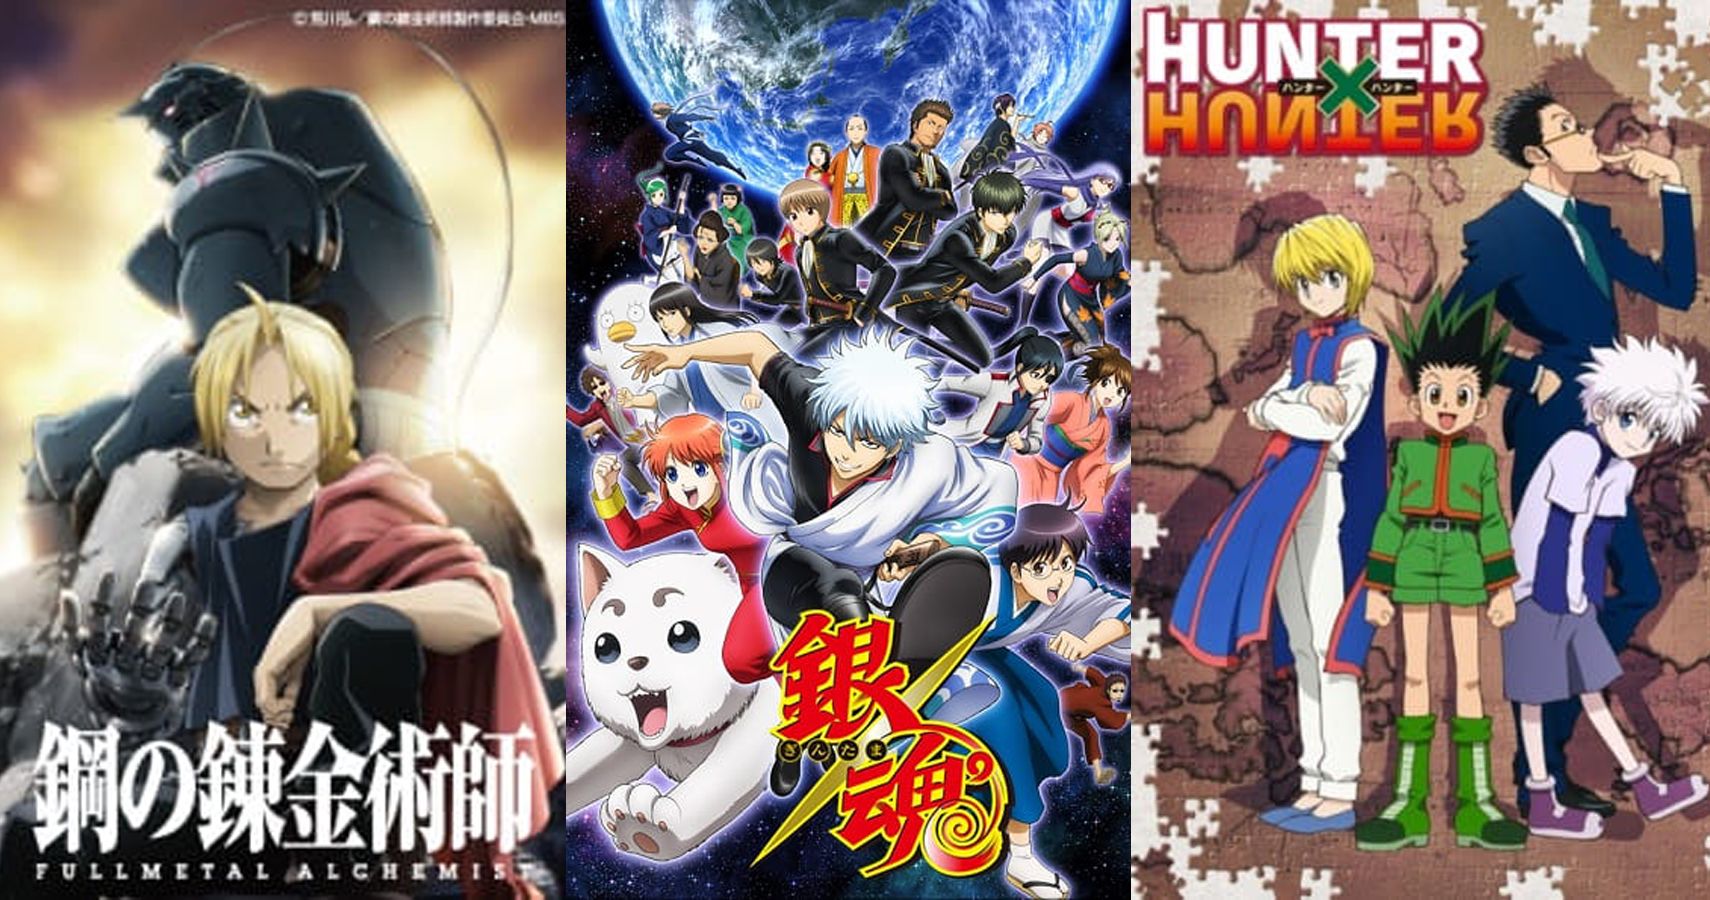 Action Anime Genre 2018 recommendation list you must watch (English Dubbed  & Subbed)